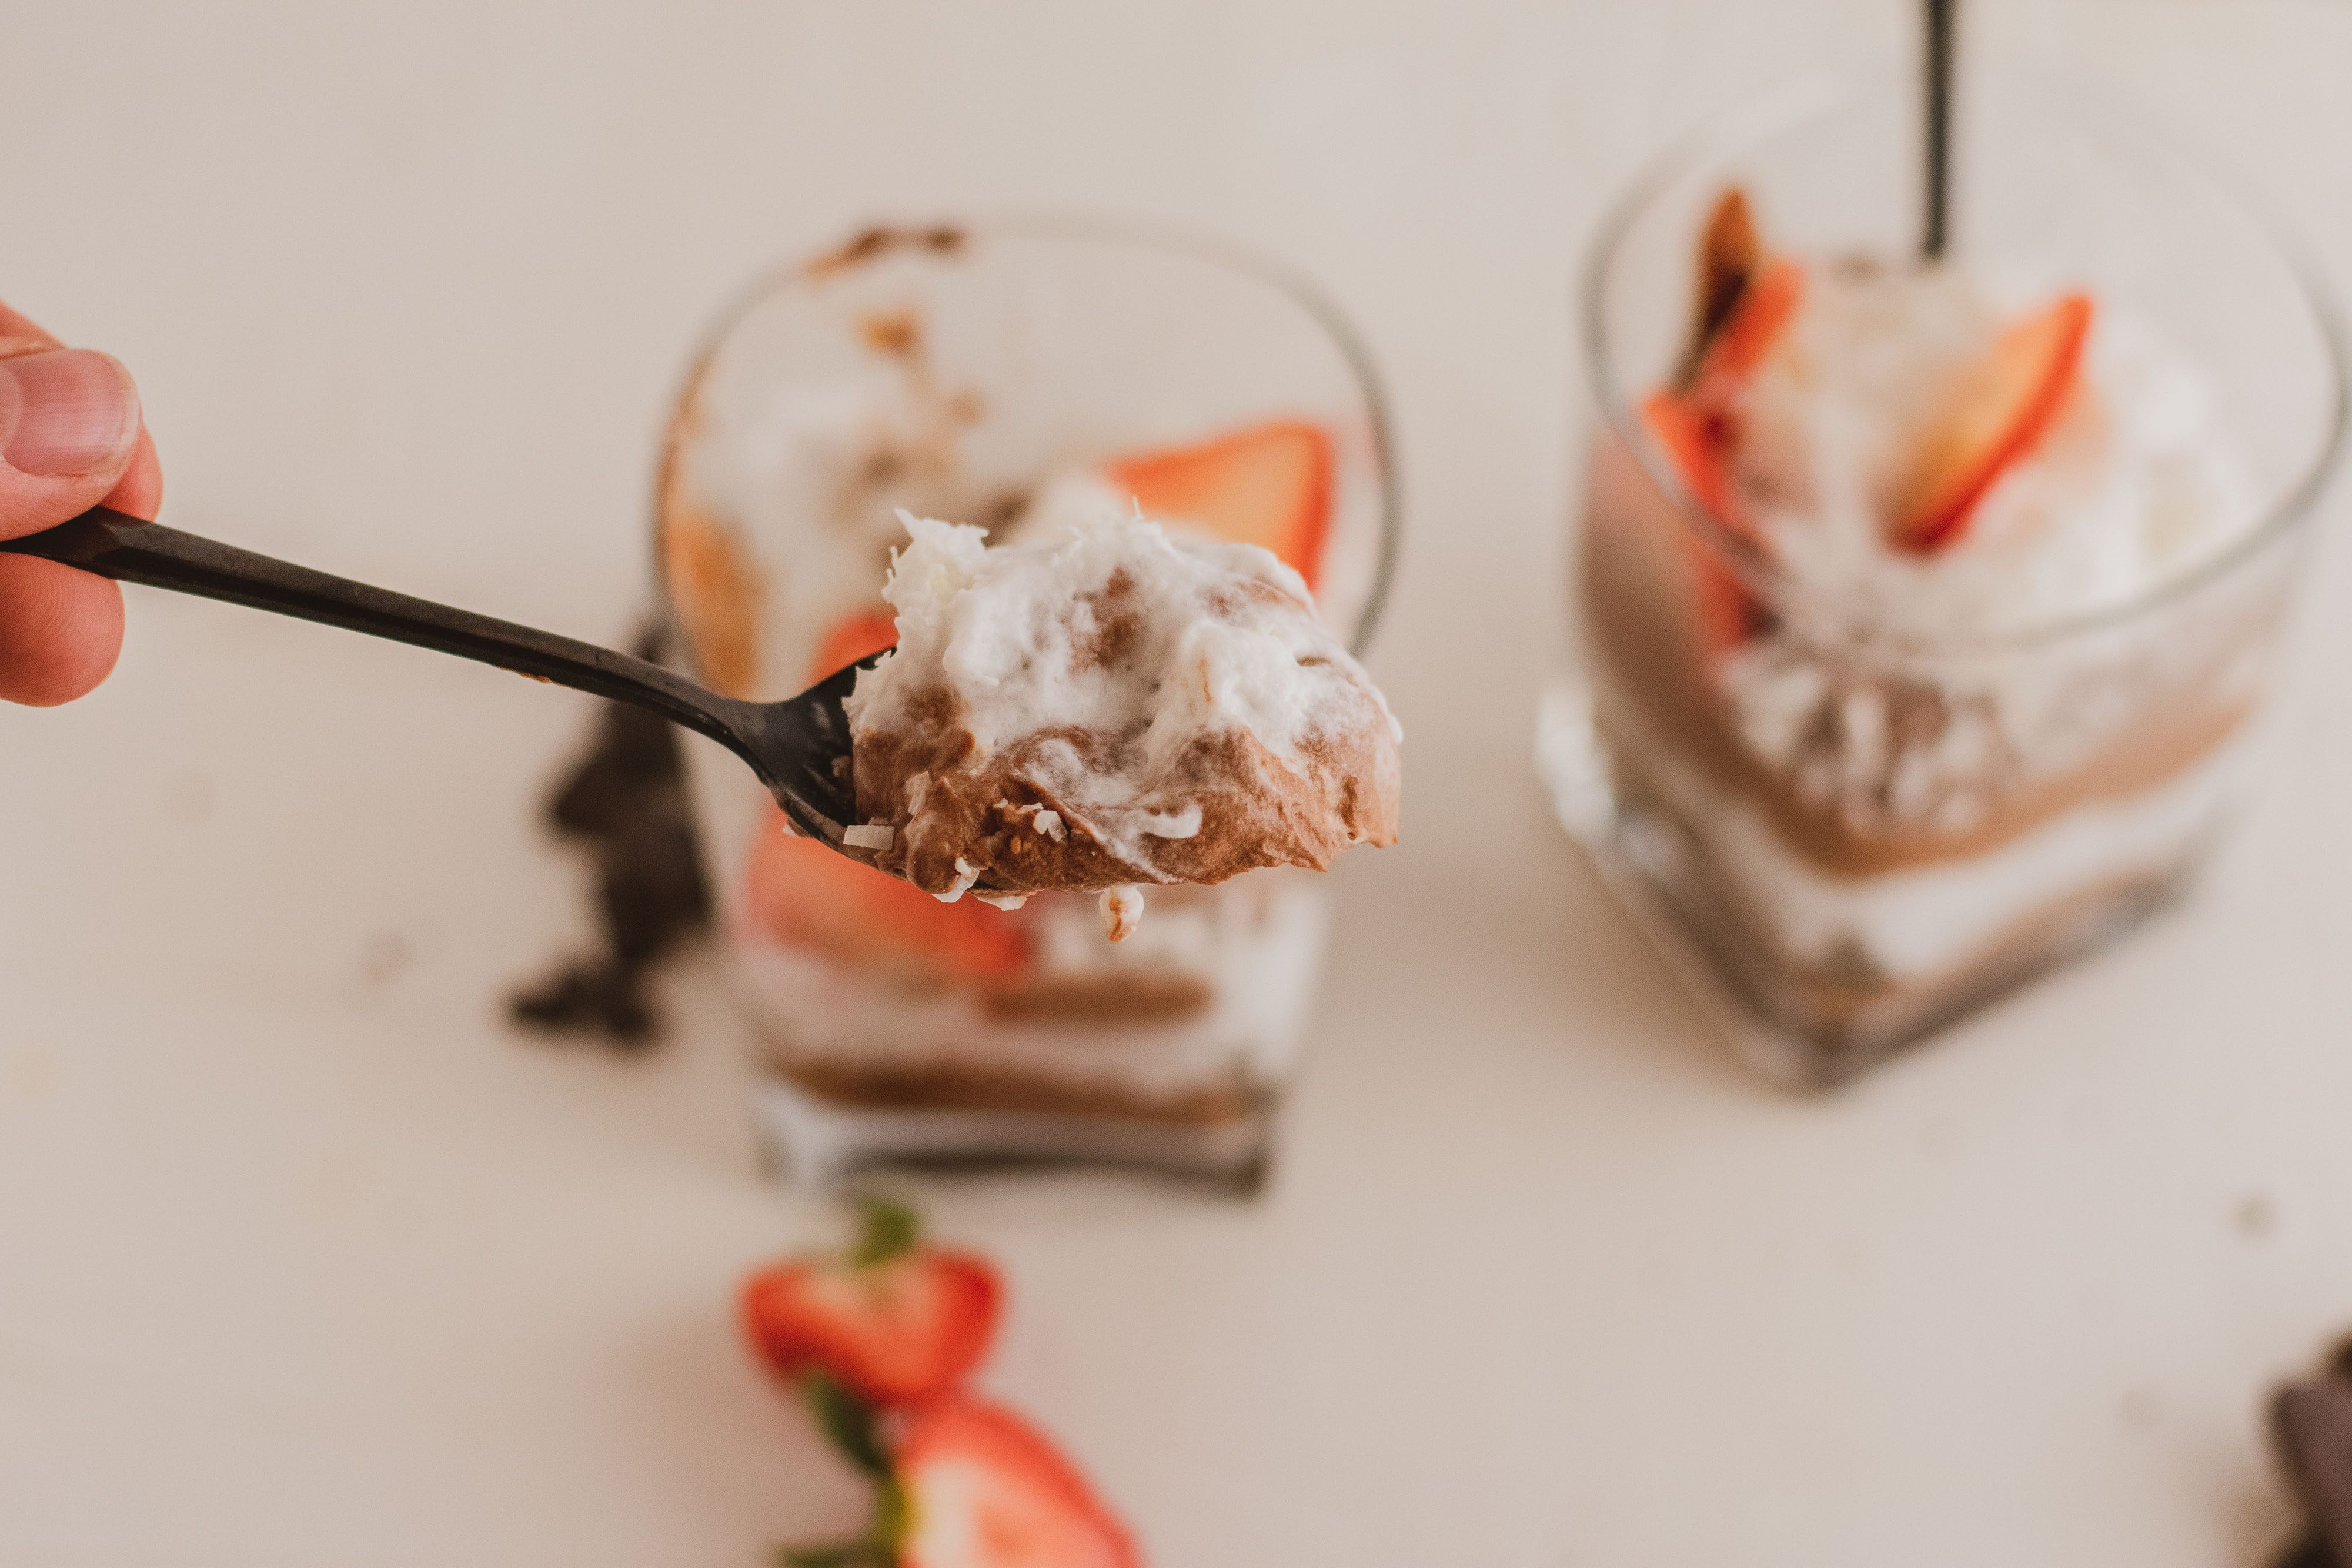 low carb Chocolate pudding with whipped cream topped with strawberries with a black spoon grabbing a bite on a white surface